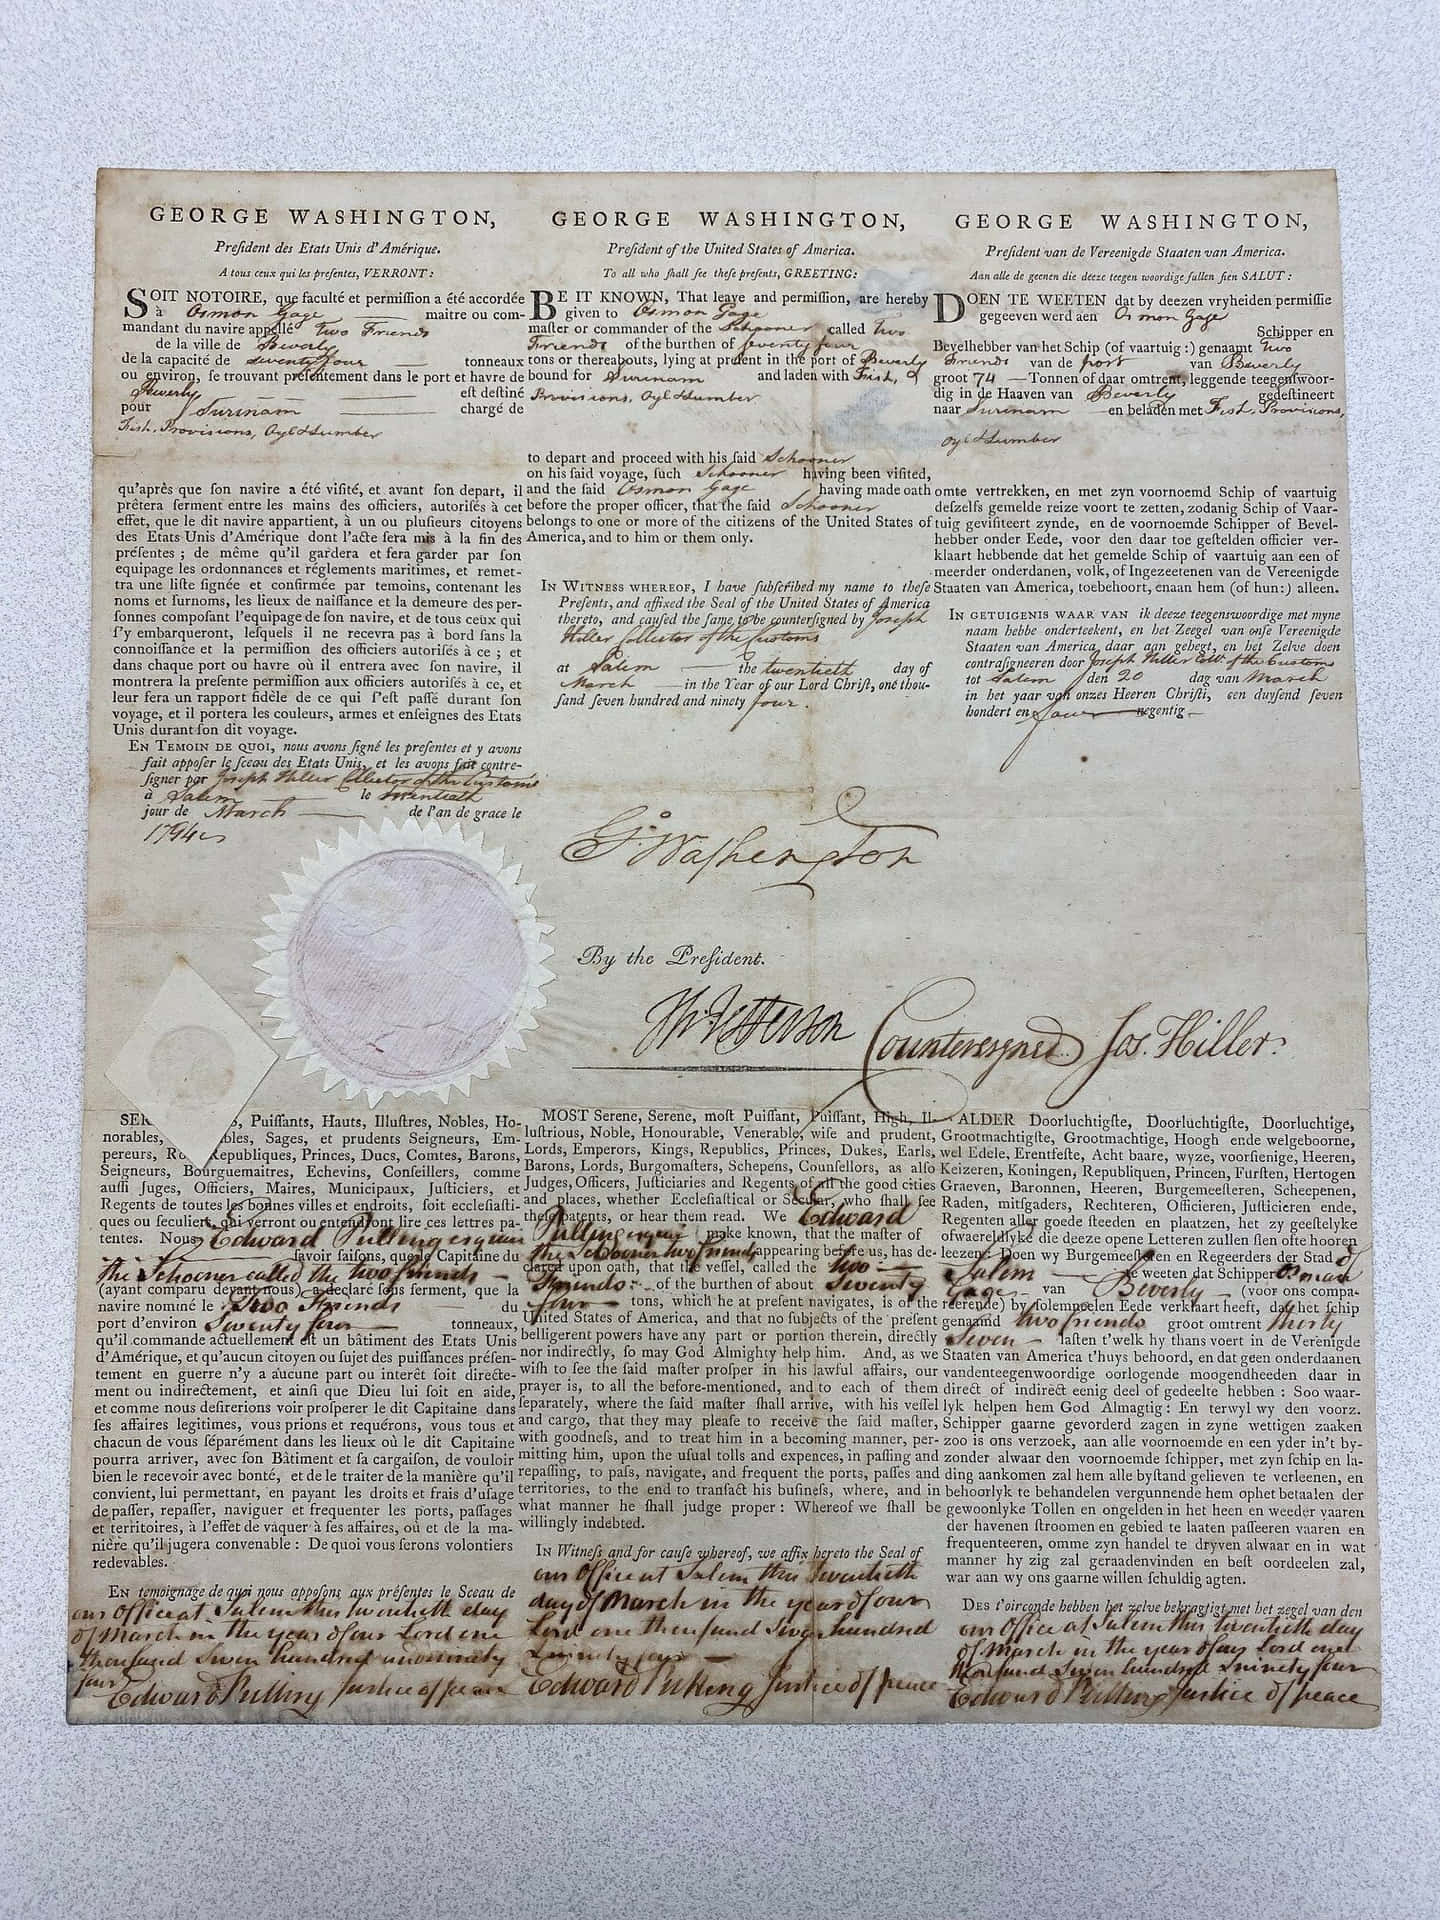 A Document With A Stamp On It